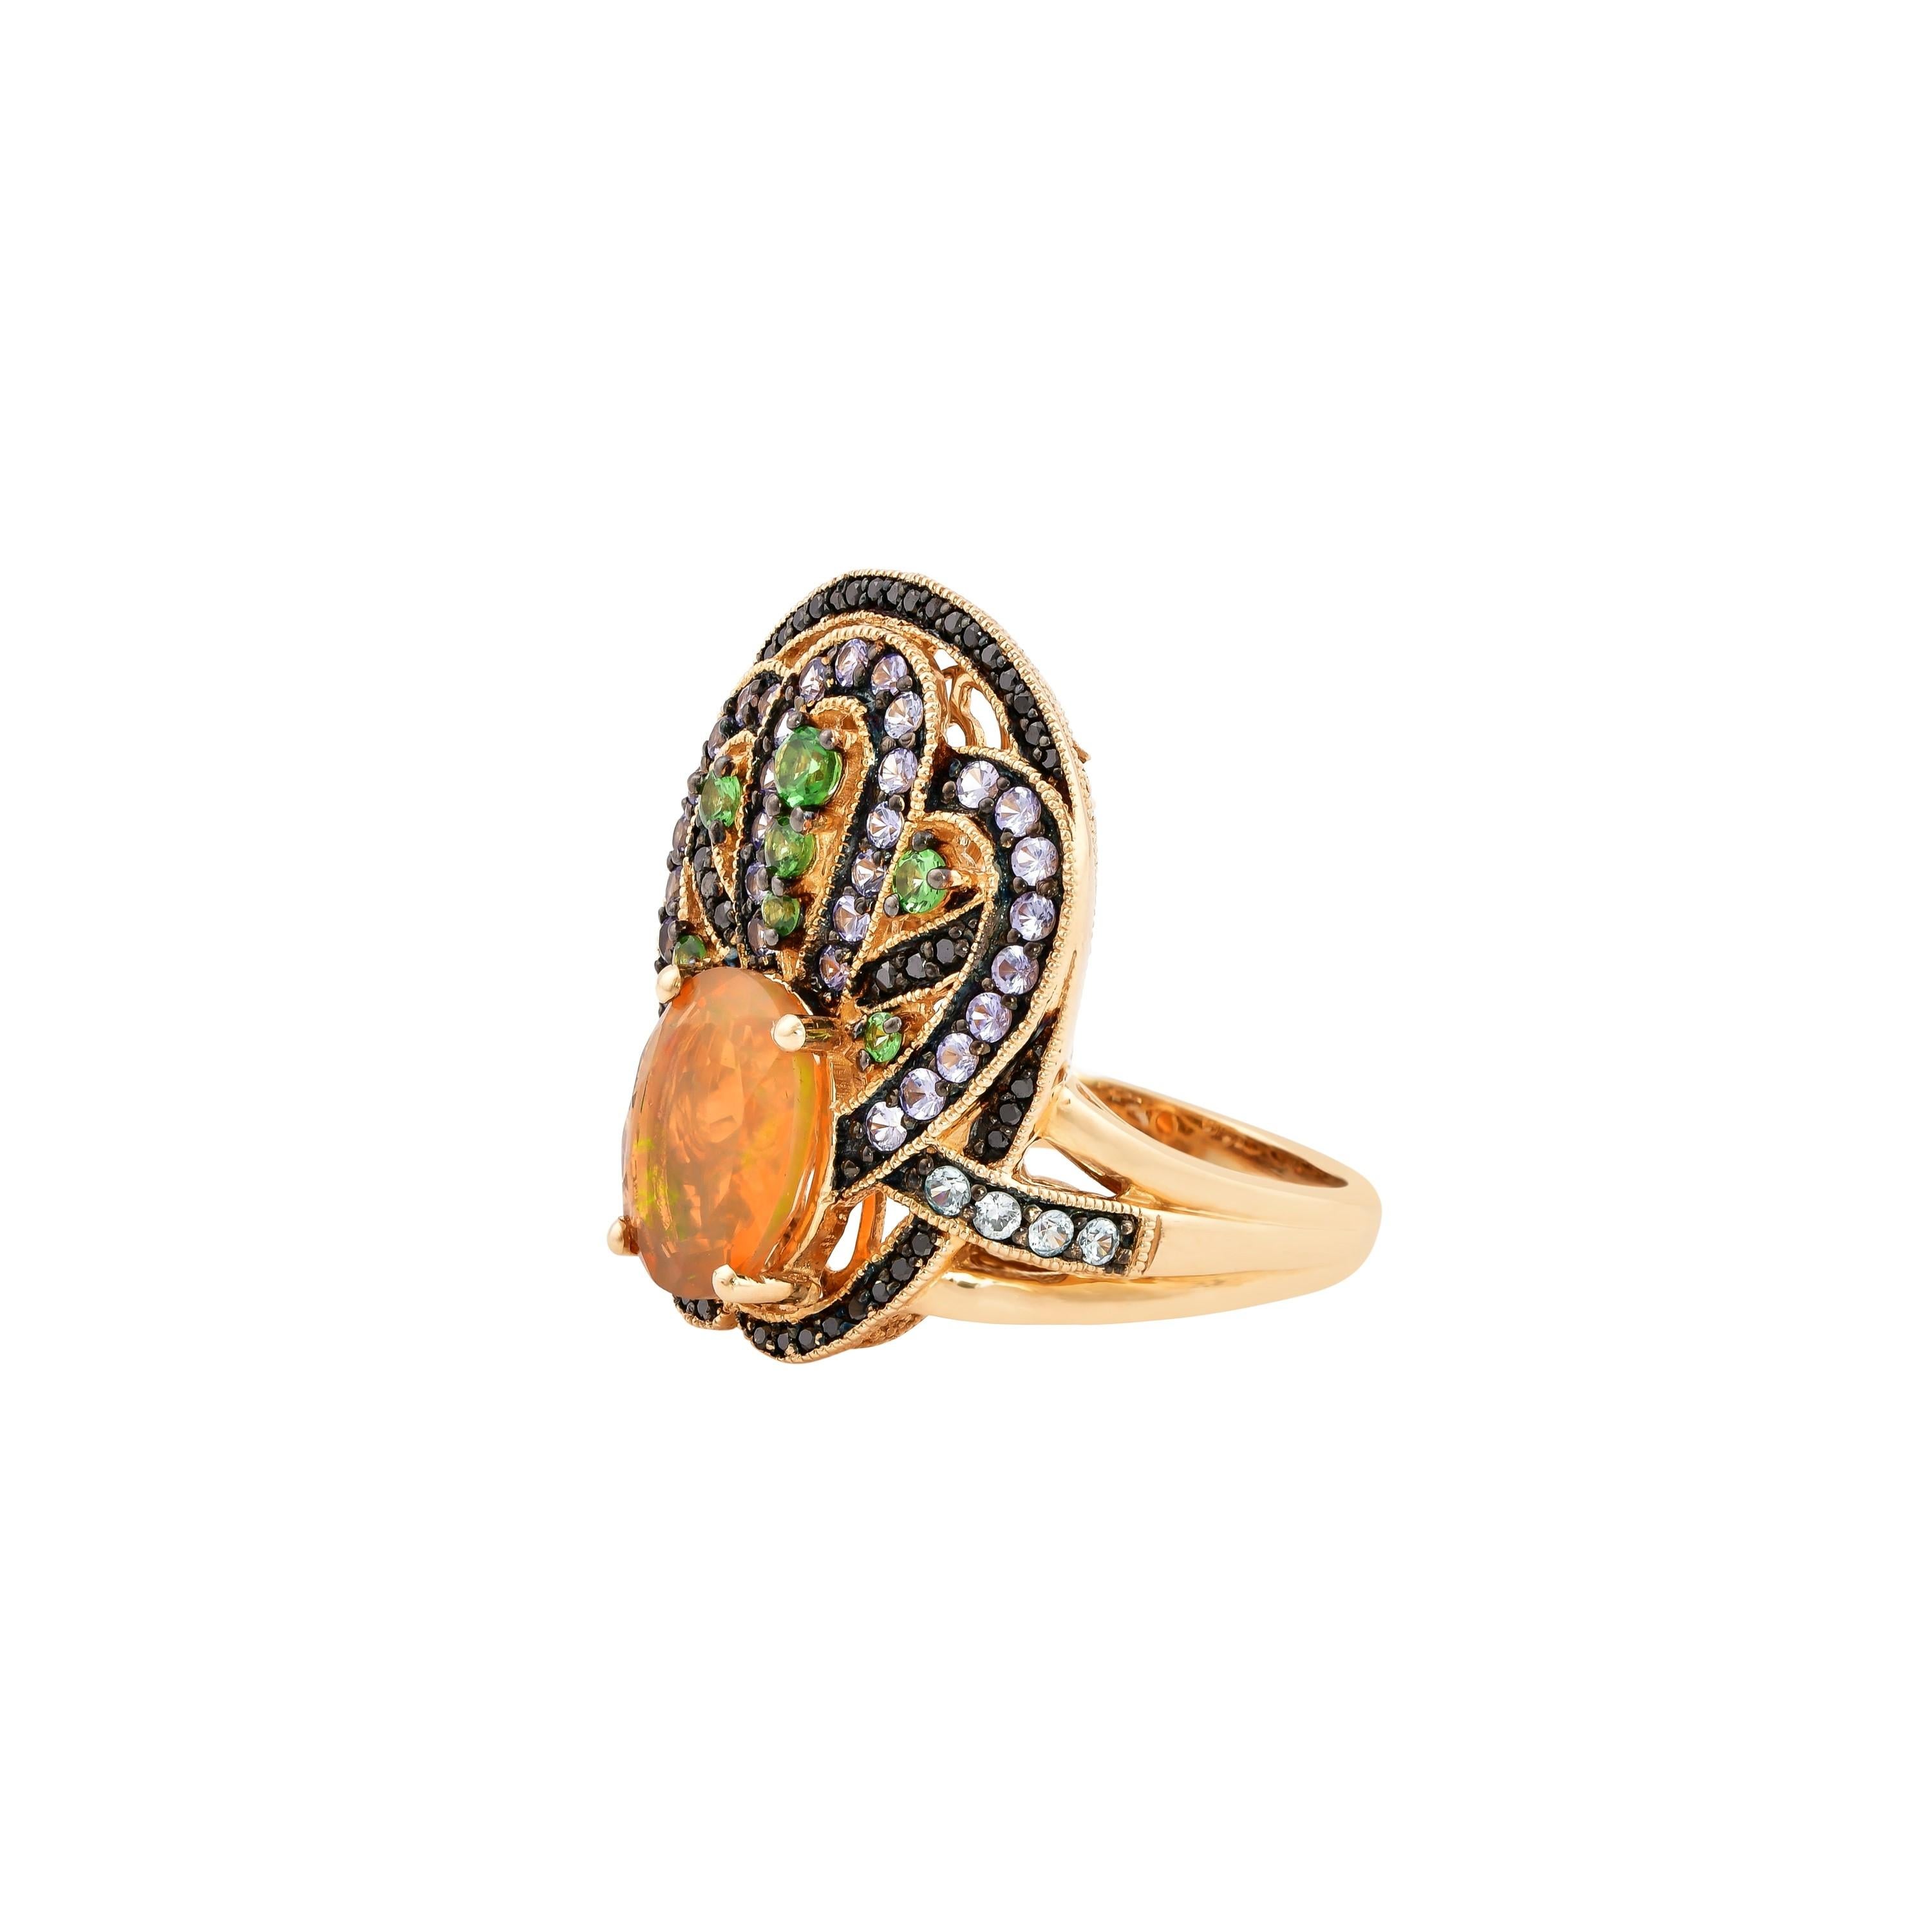 Contemporary 1.65 Carat Ethiopian Opal Ring in 14 Karat Yellow Gold with Diamonds